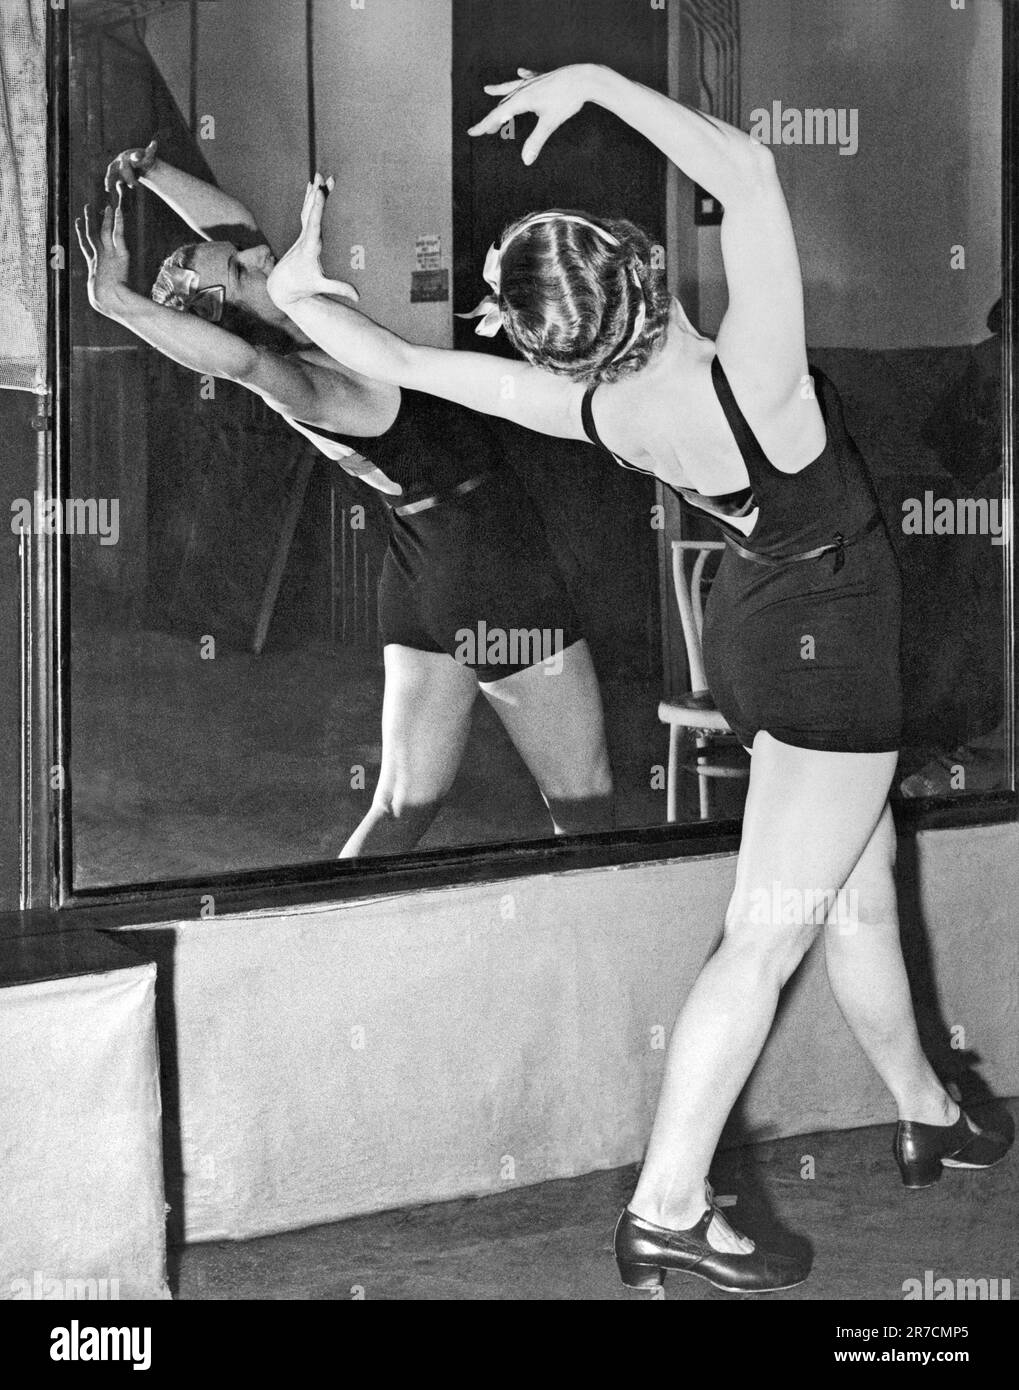 London, England:  c. 1934. Princess Irene Bogdan of Romania training at the London Dance School to make her dancing debut in a forthcoming production. Stock Photo